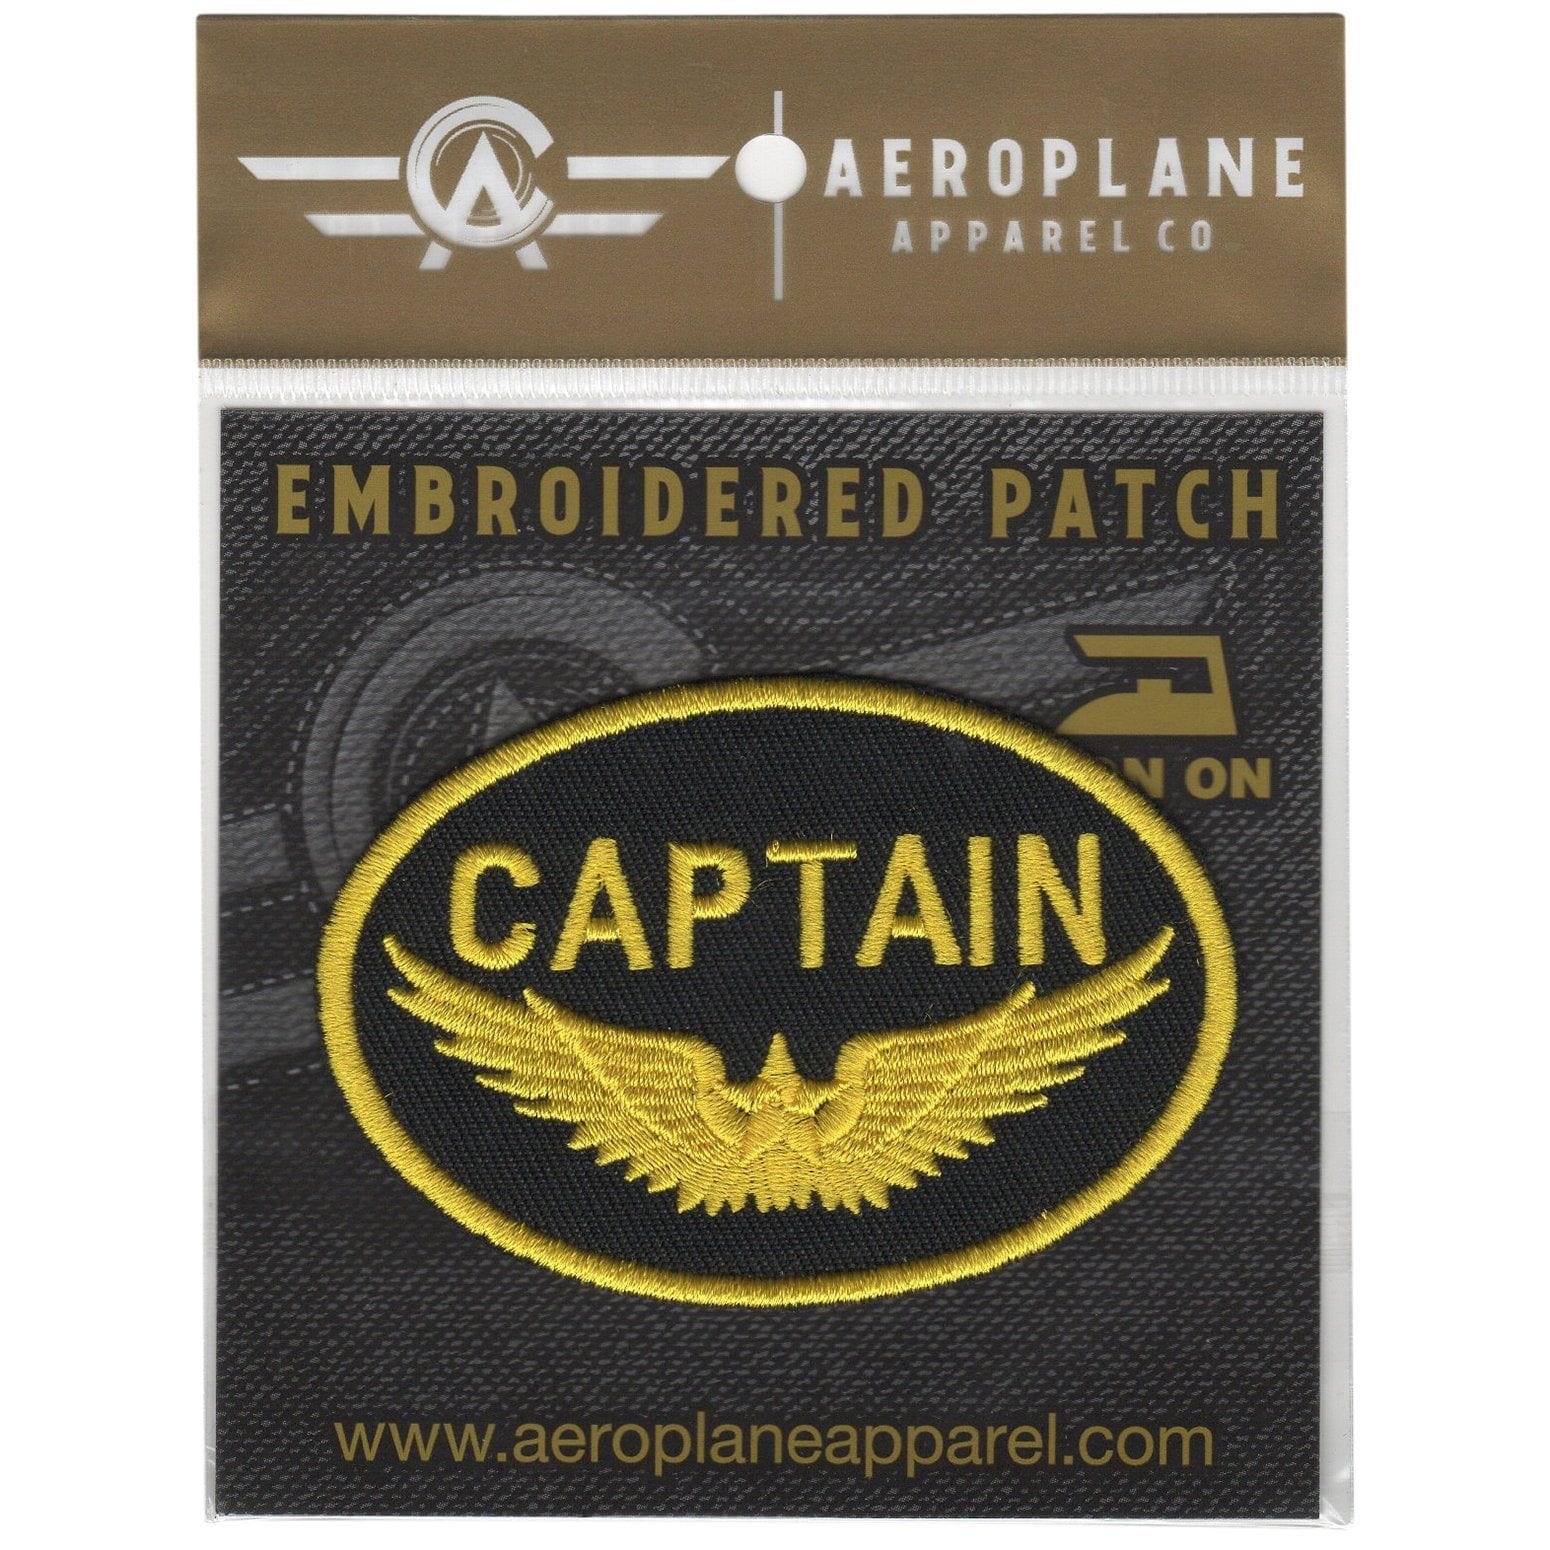 Captain Gold Wings Embroidered Patch (Iron On Application)